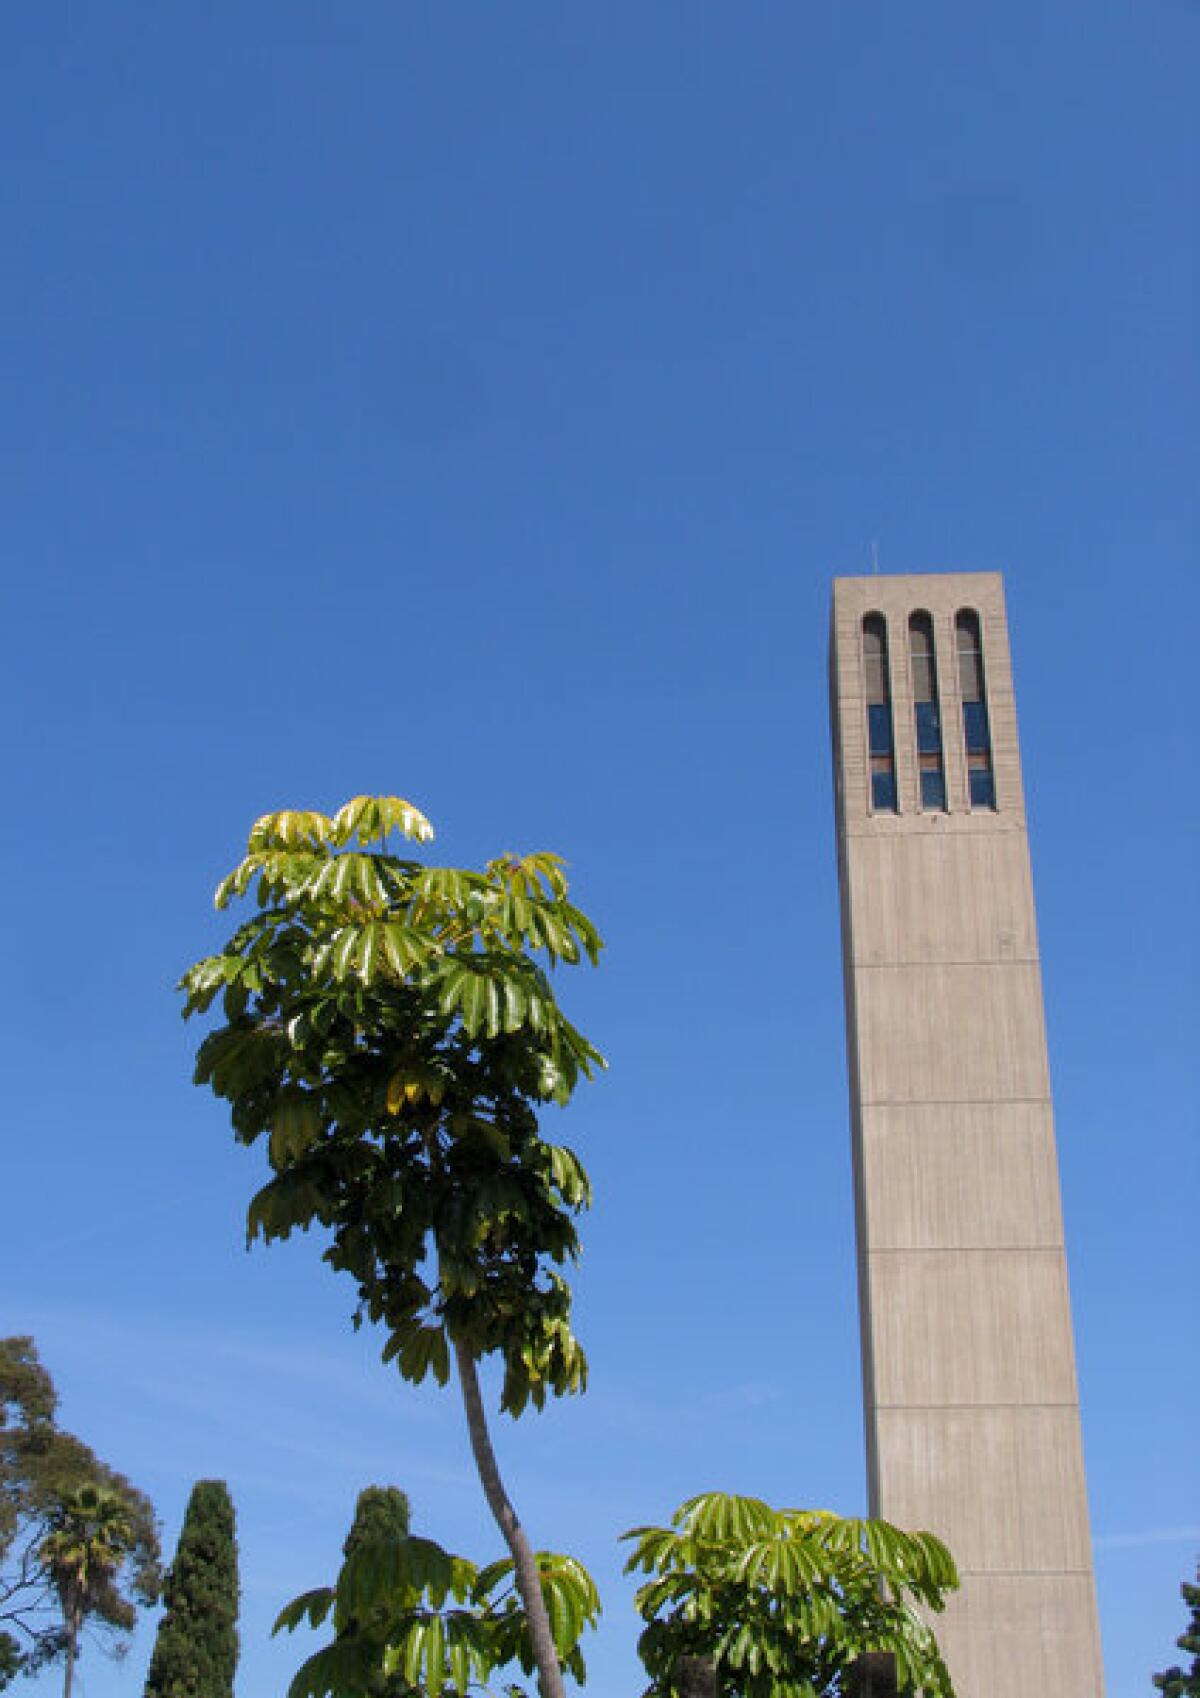 A third student at UC Santa Barbara has been diagnosed with the disease that causes meningitis. Above, Storke Tower presides over the campus.